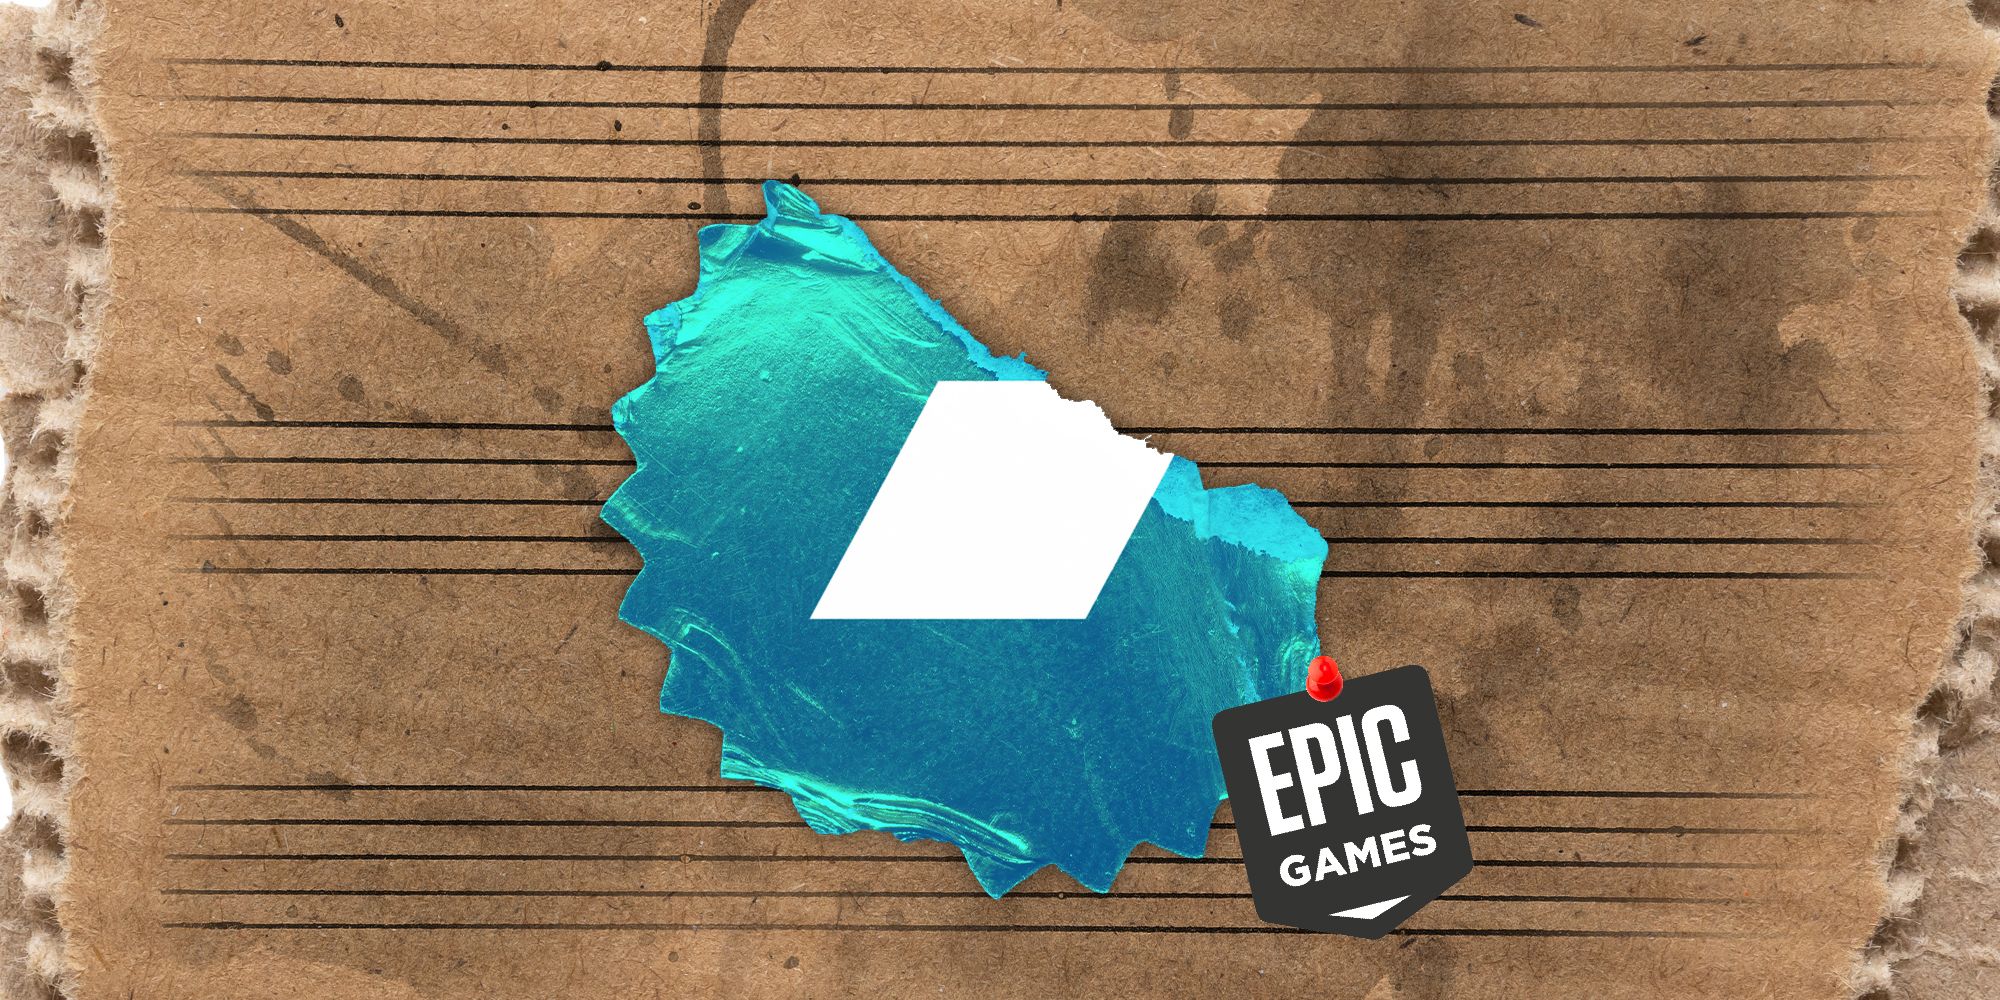 Epic Games is laying off about 830 employees, divesting Bandcamp